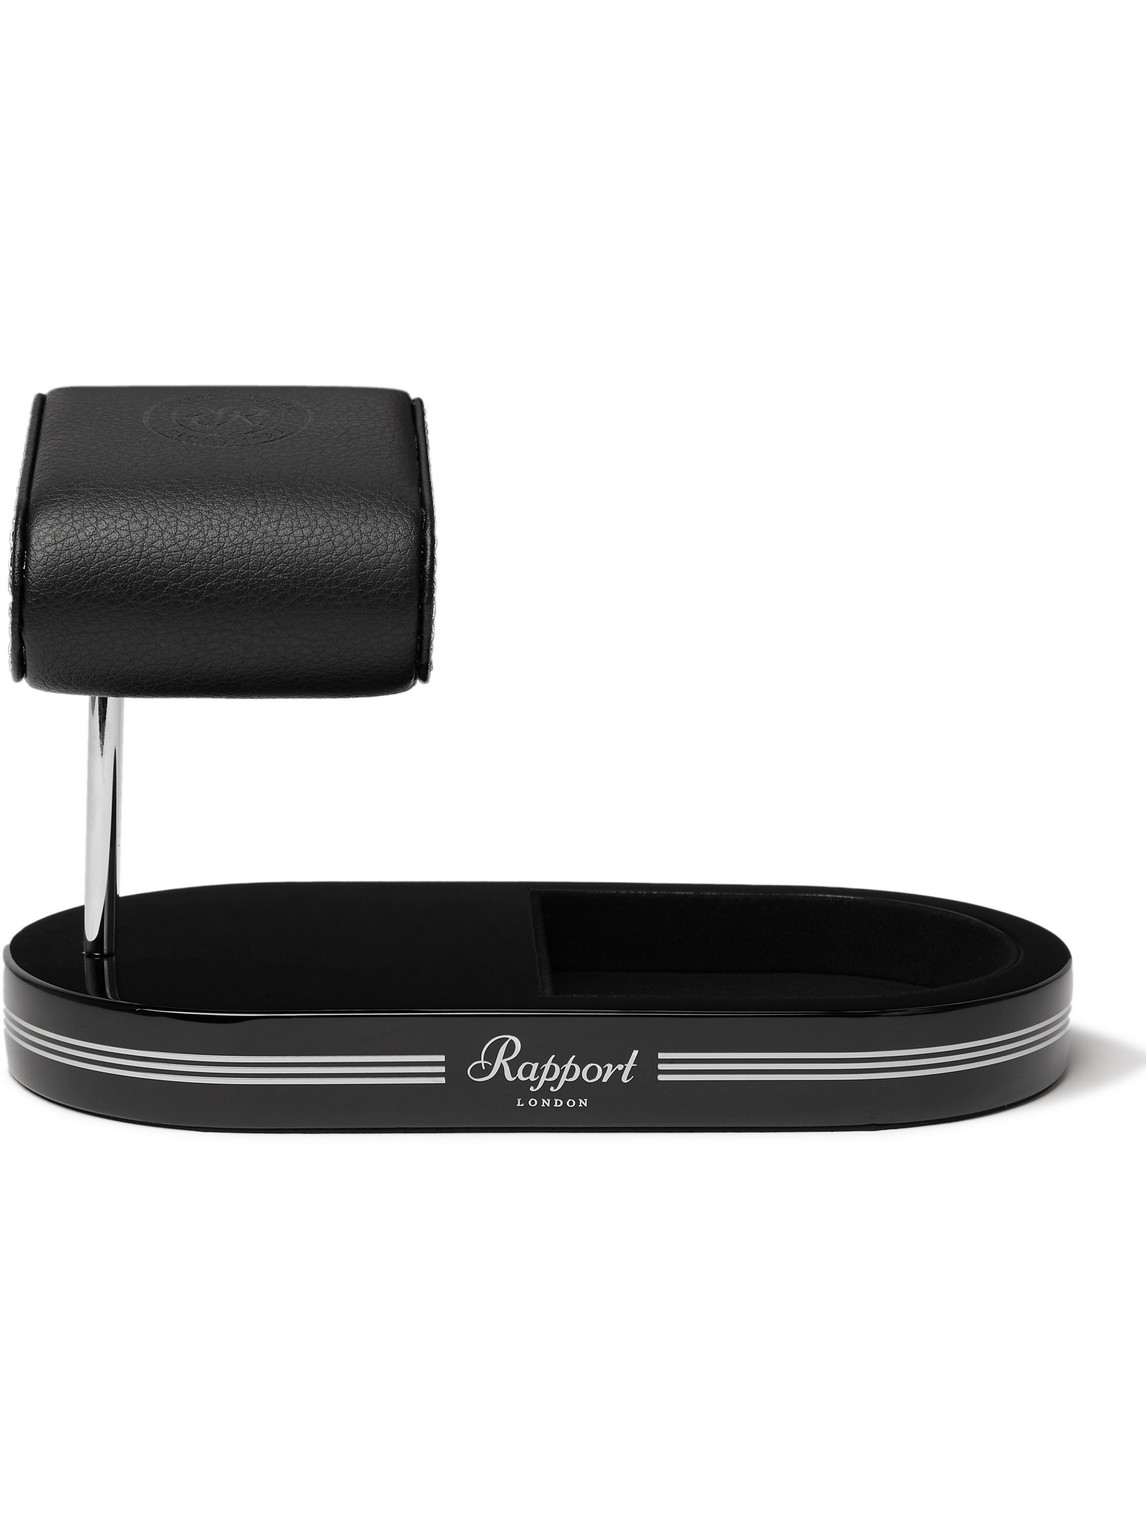 Rapport London Full-grain Leather Watch Stand In Black